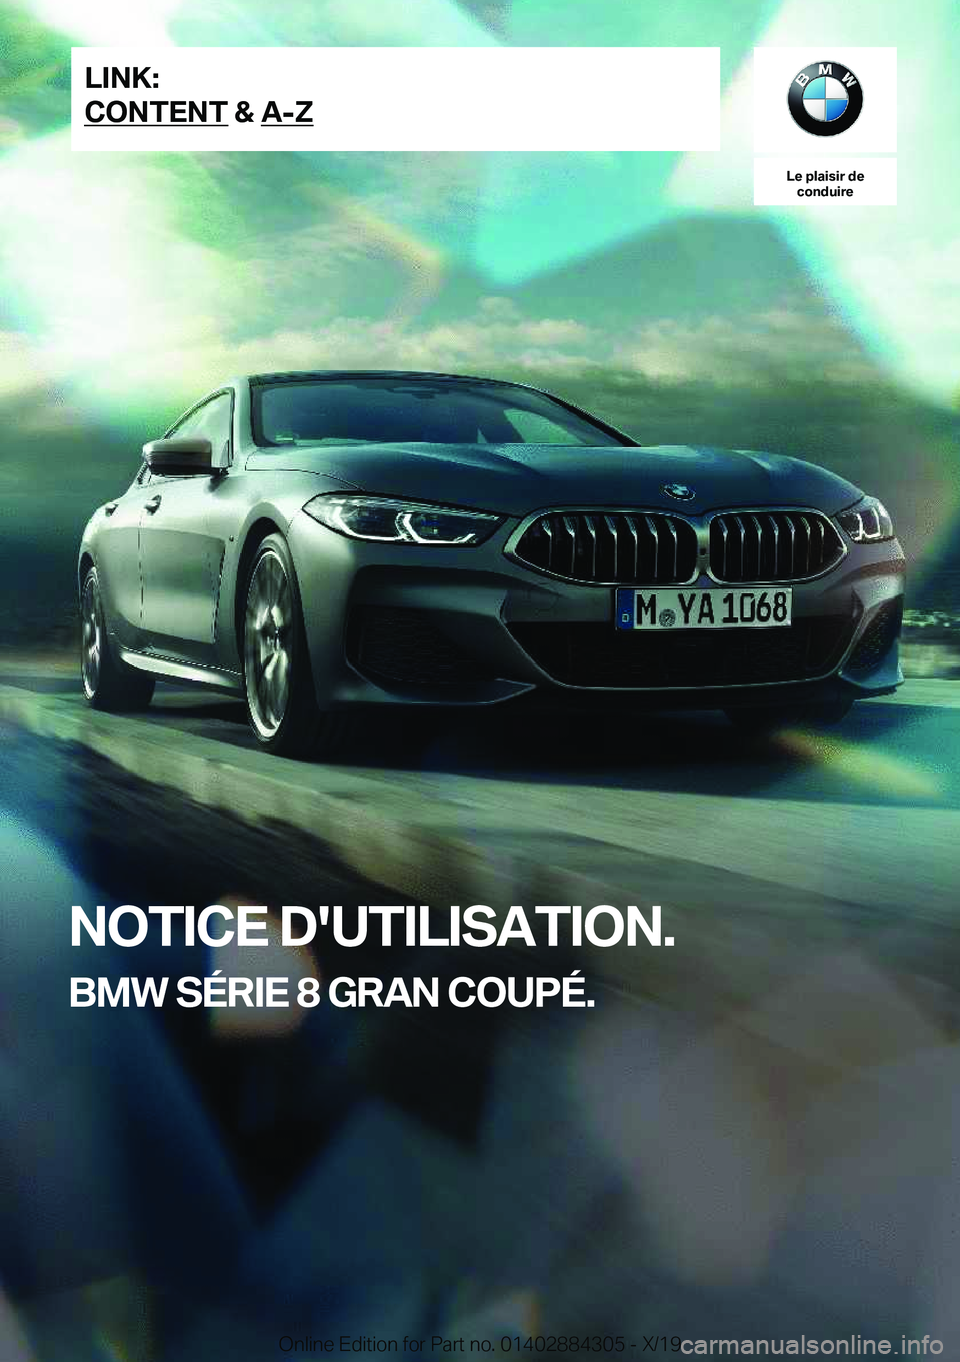 BMW 8 SERIES GRAN COUPE 2020  Notices Demploi (in French) �L�e��p�l�a�i�s�i�r��d�e�c�o�n�d�u�i�r�e
�N�O�T�I�C�E��D�'�U�T�I�L�I�S�A�T�I�O�N�.
�B�M�W��S�